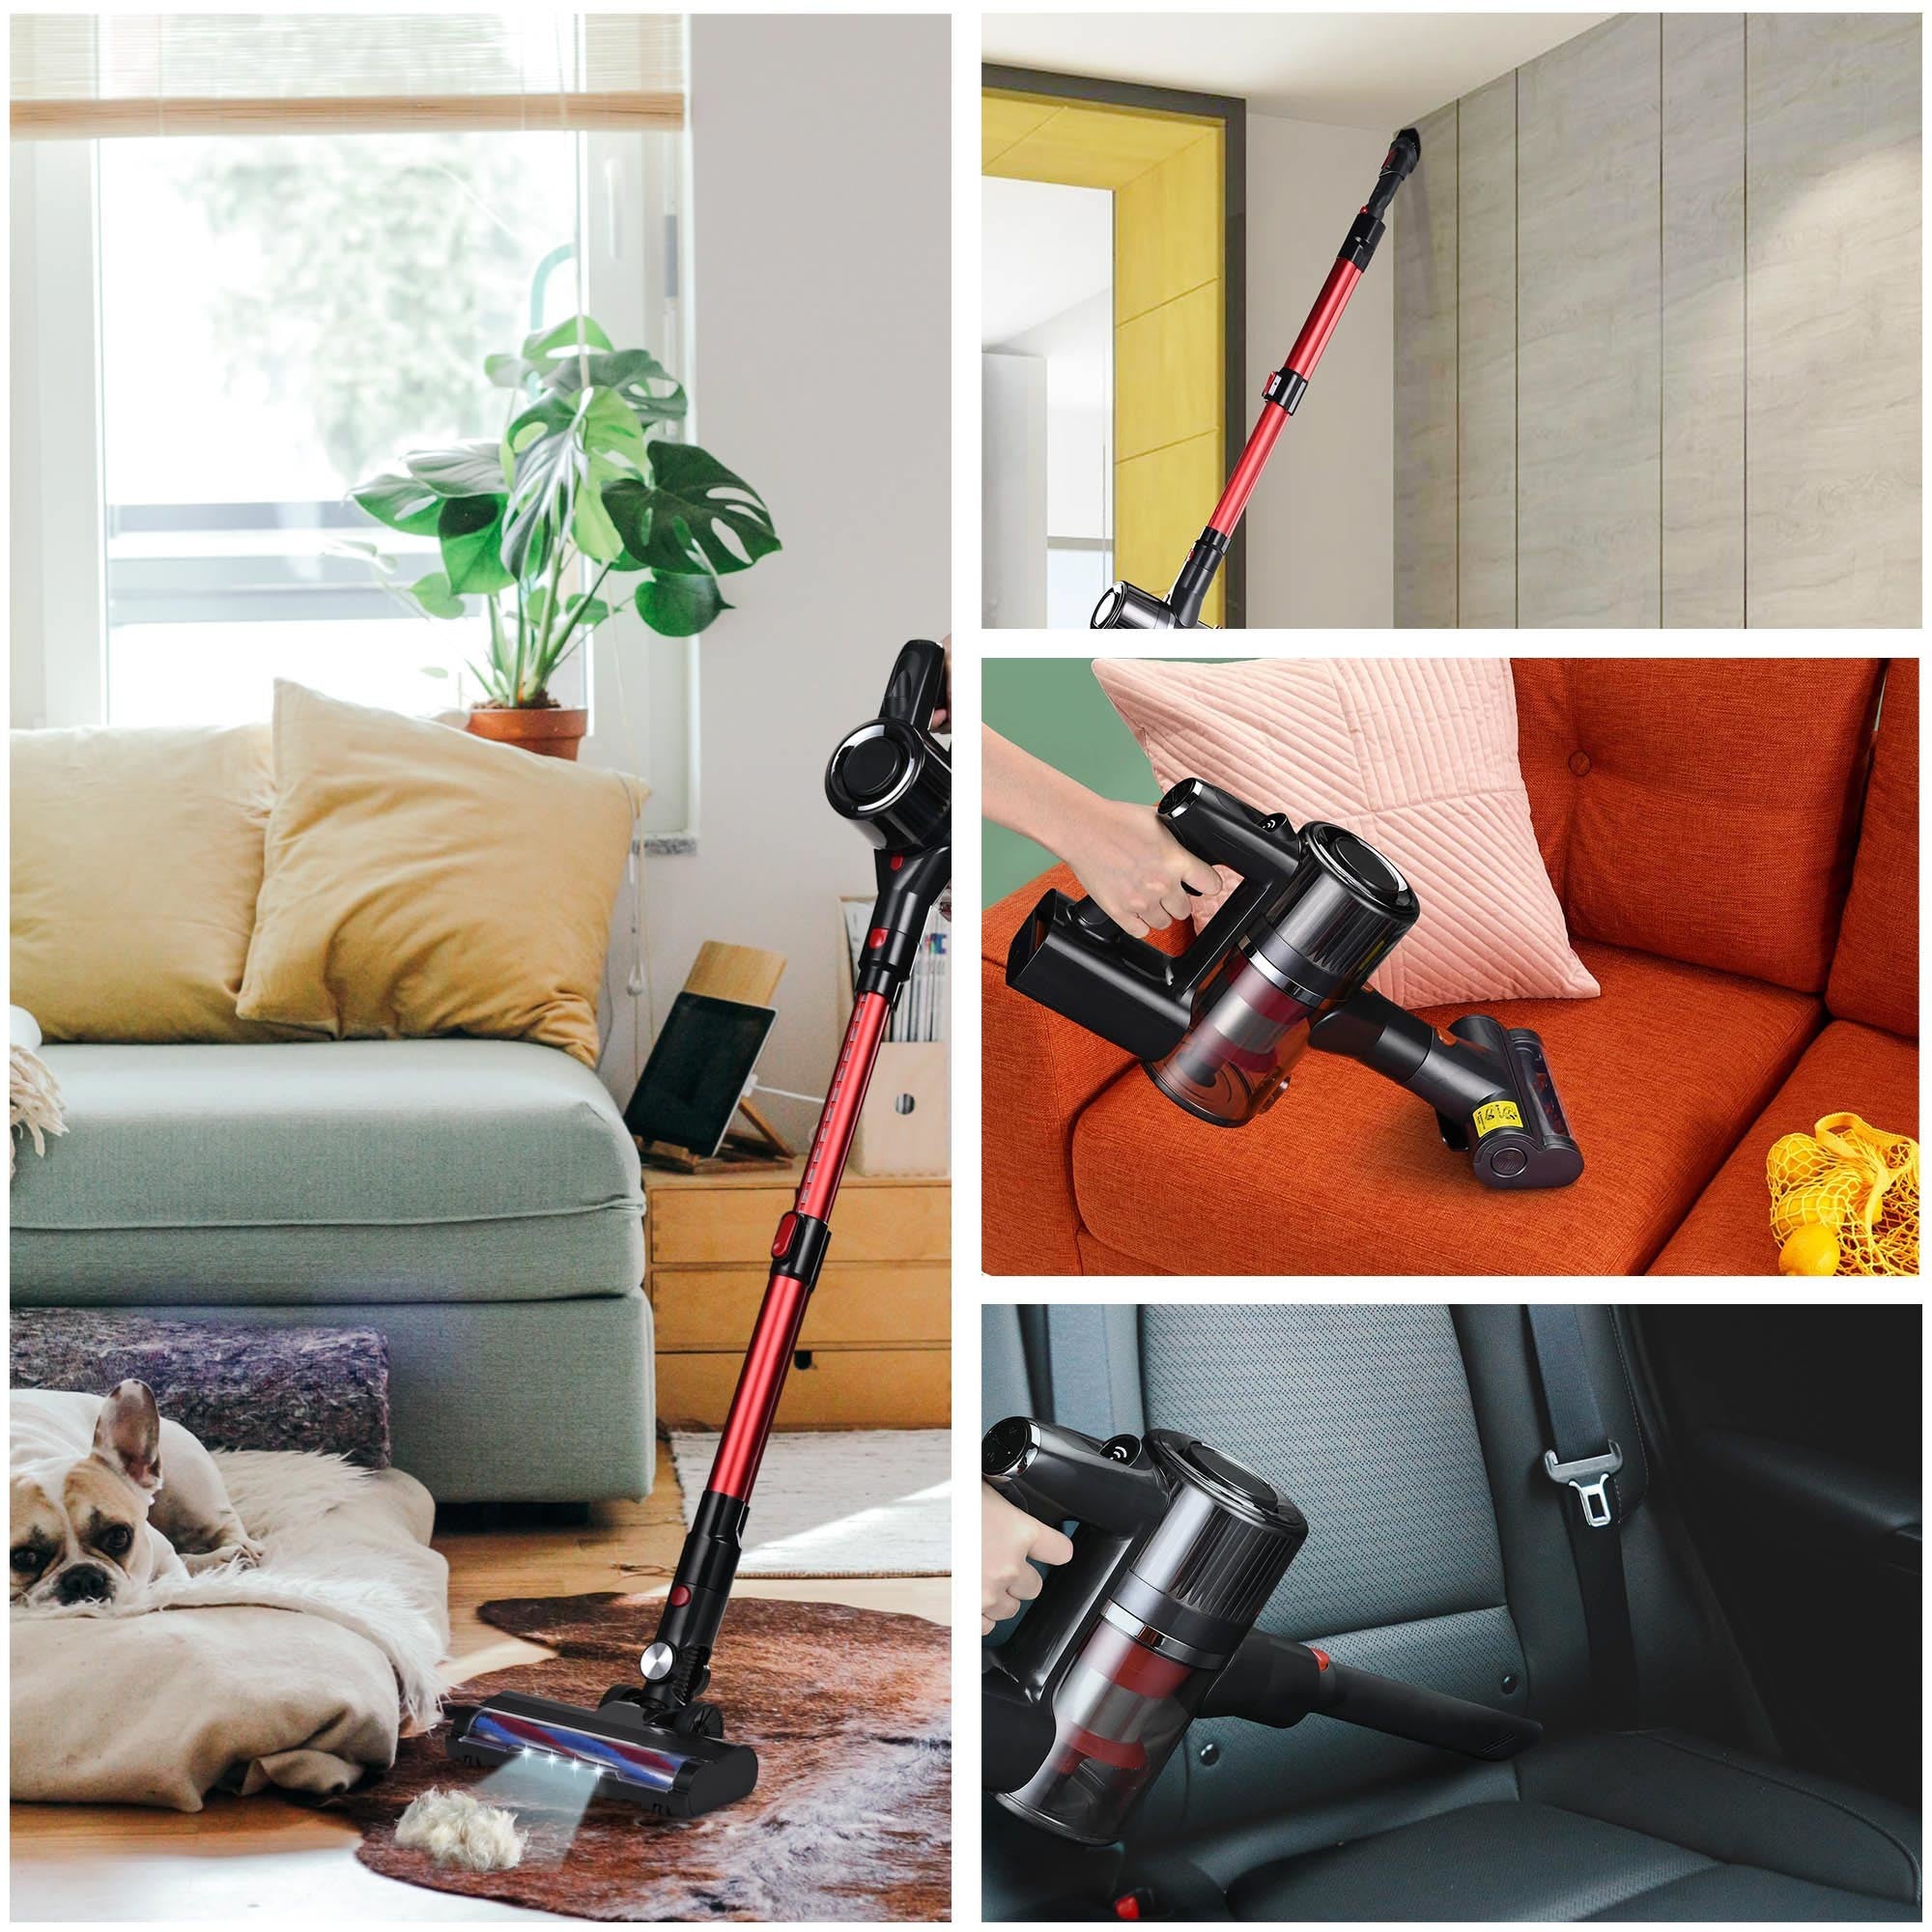 A whall 25kPa Suction 4 in 1 Foldable Cordless Stick Vacuum Cleaner with different attachments.